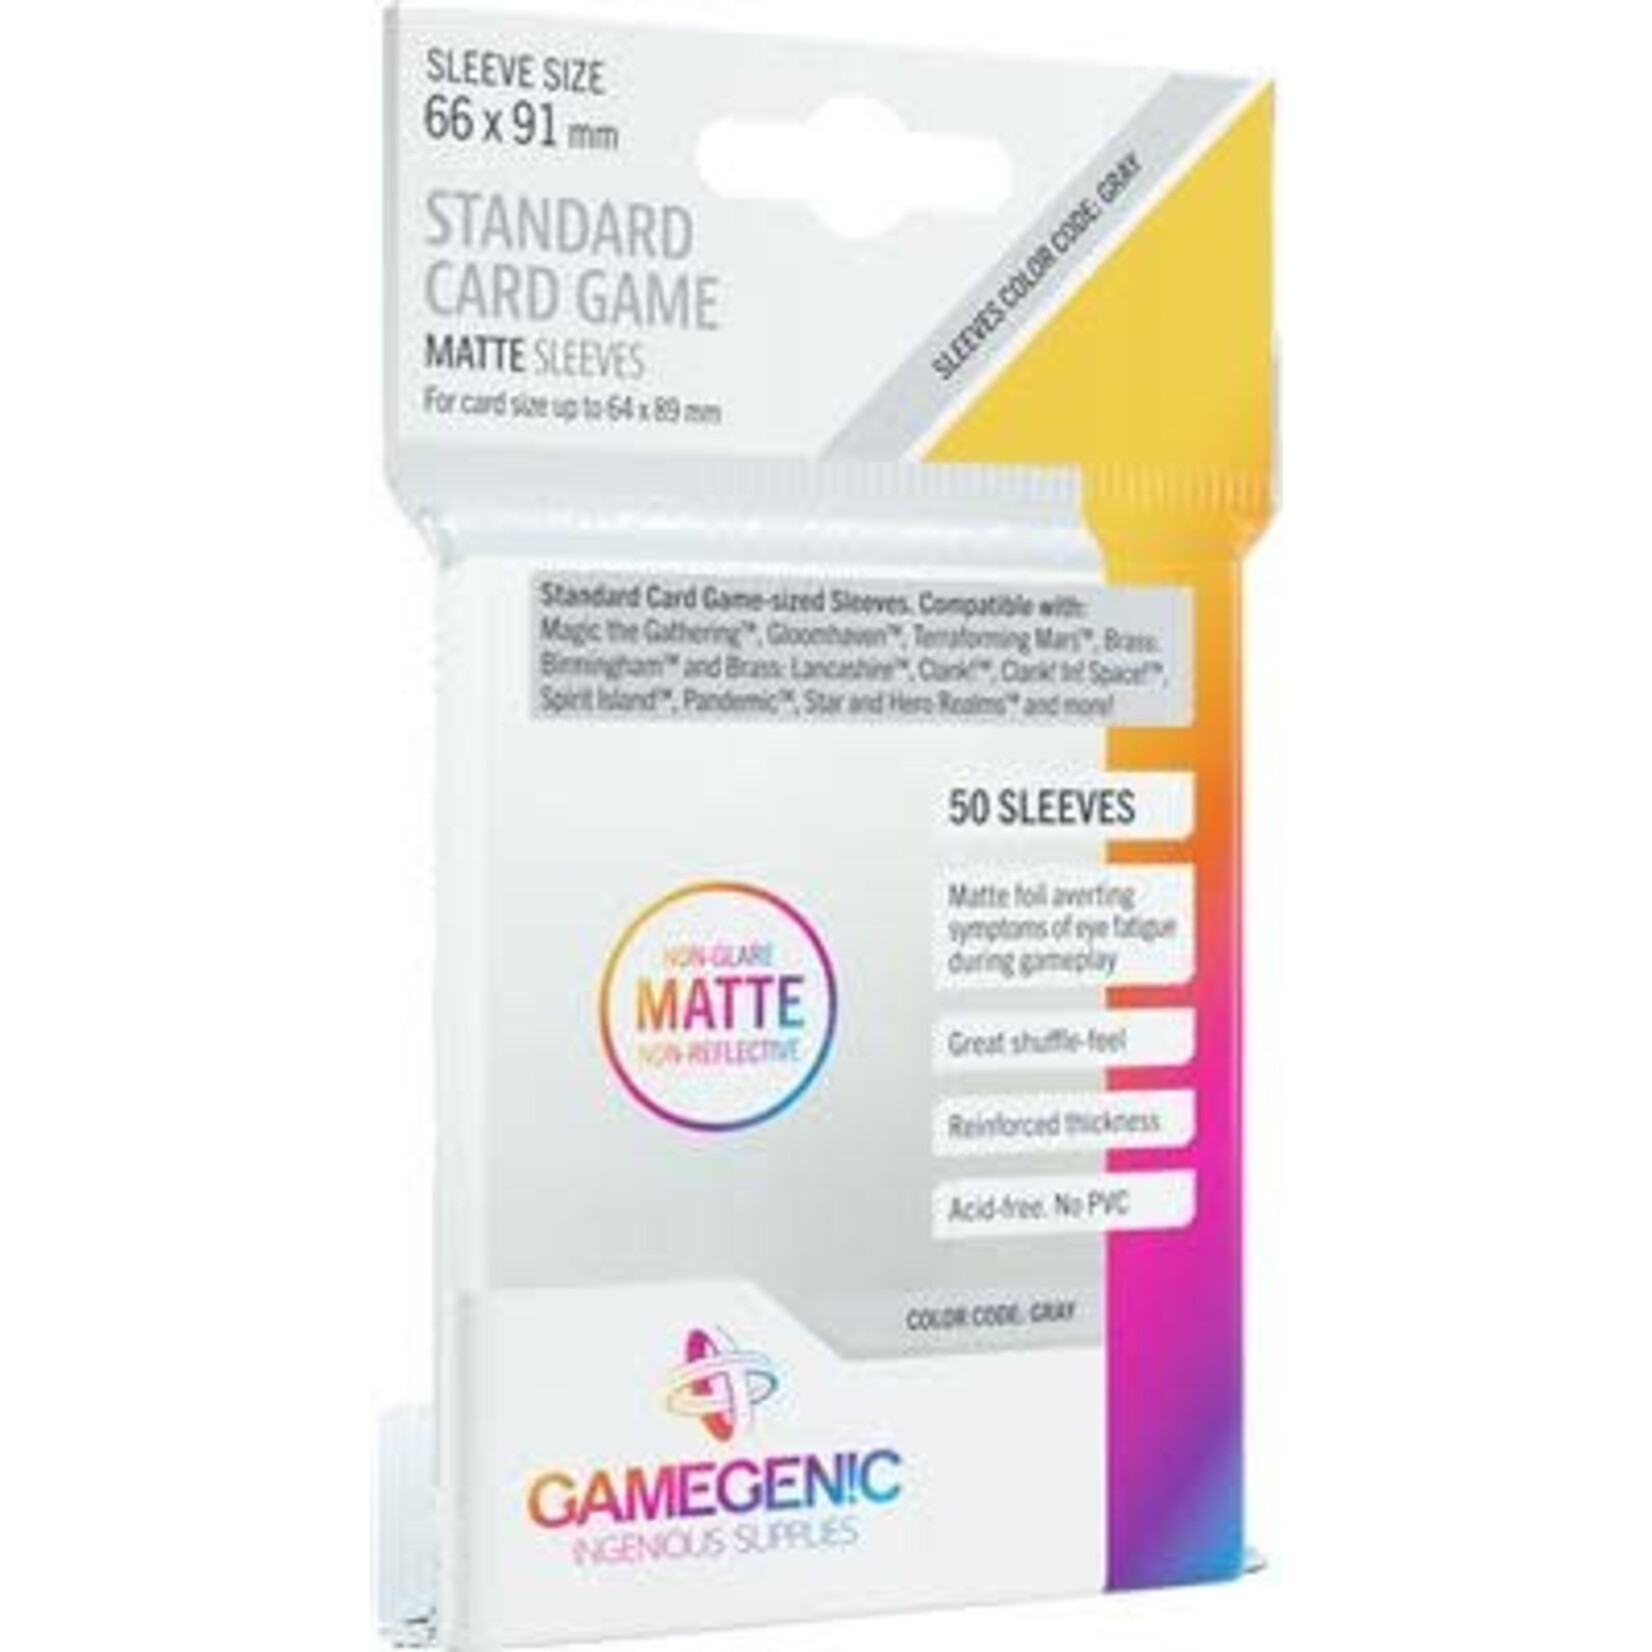 Gamegenic Board Game Sleeves - Standard Card Game (66 x 91) Matte